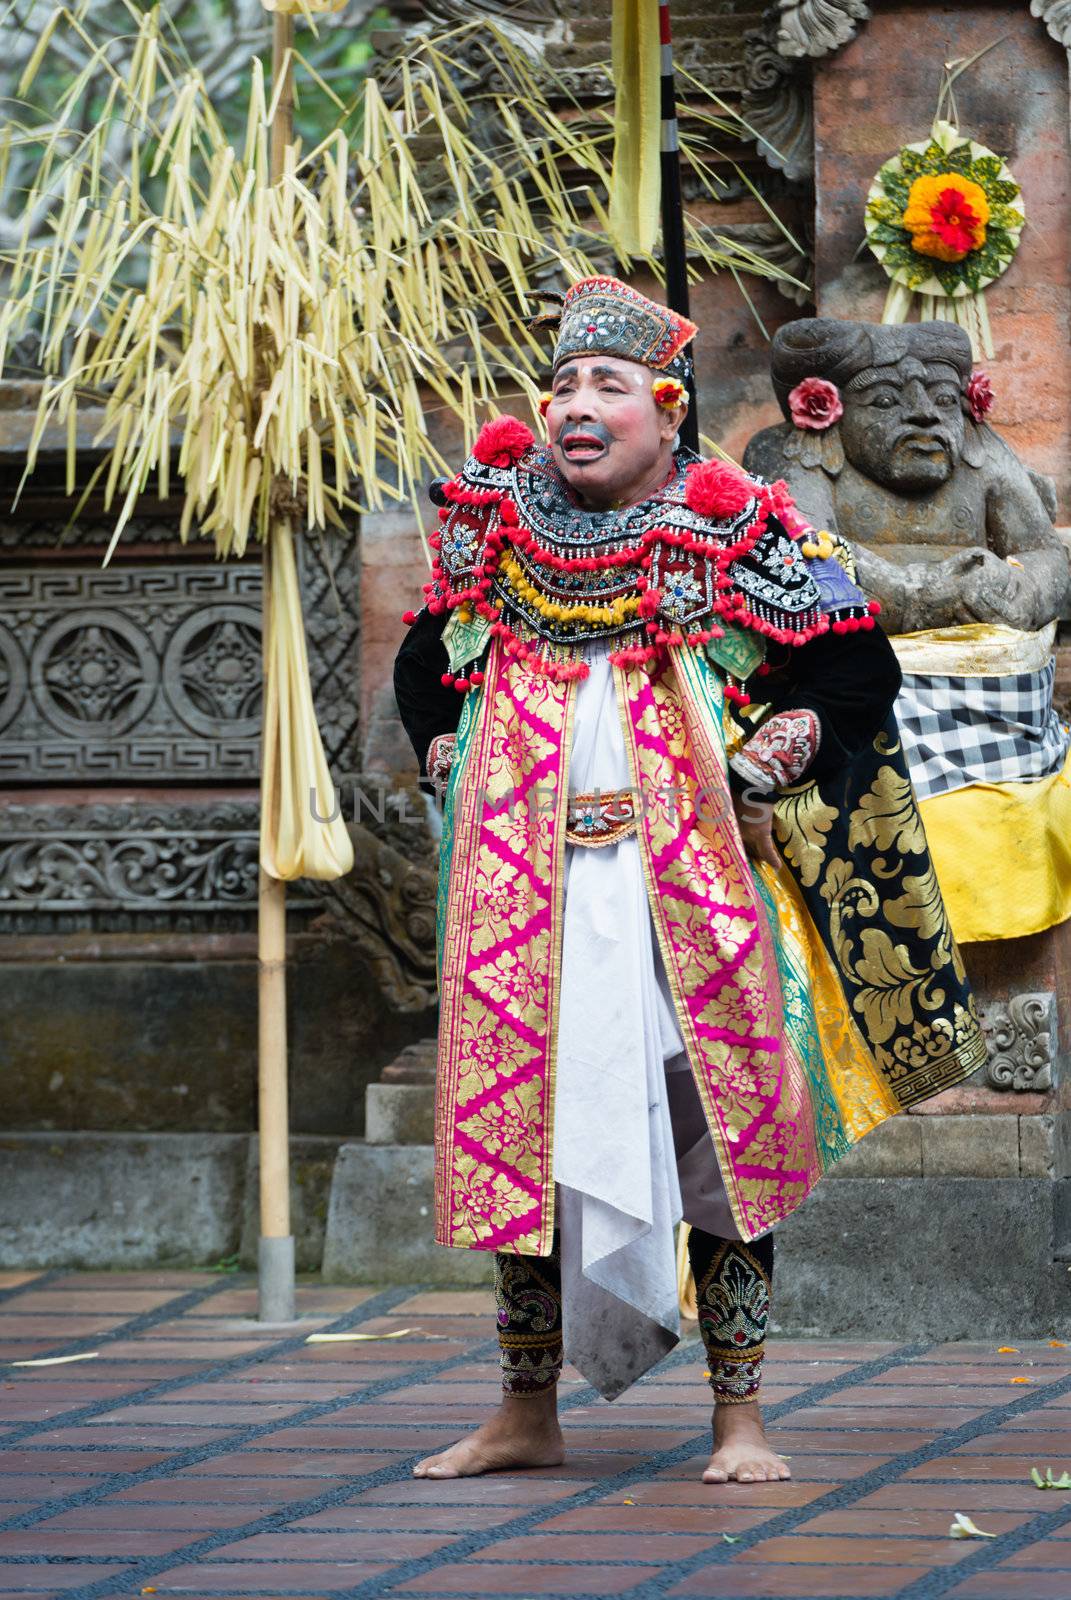 UBUD, BALI, INDONESIA - SEP 21: Actor performs an adviser character on traditional balinese performance Barong on Sep 21, 2012 in Ubud, Bali, Indonesia. The show is popular tourist attraction on Bali